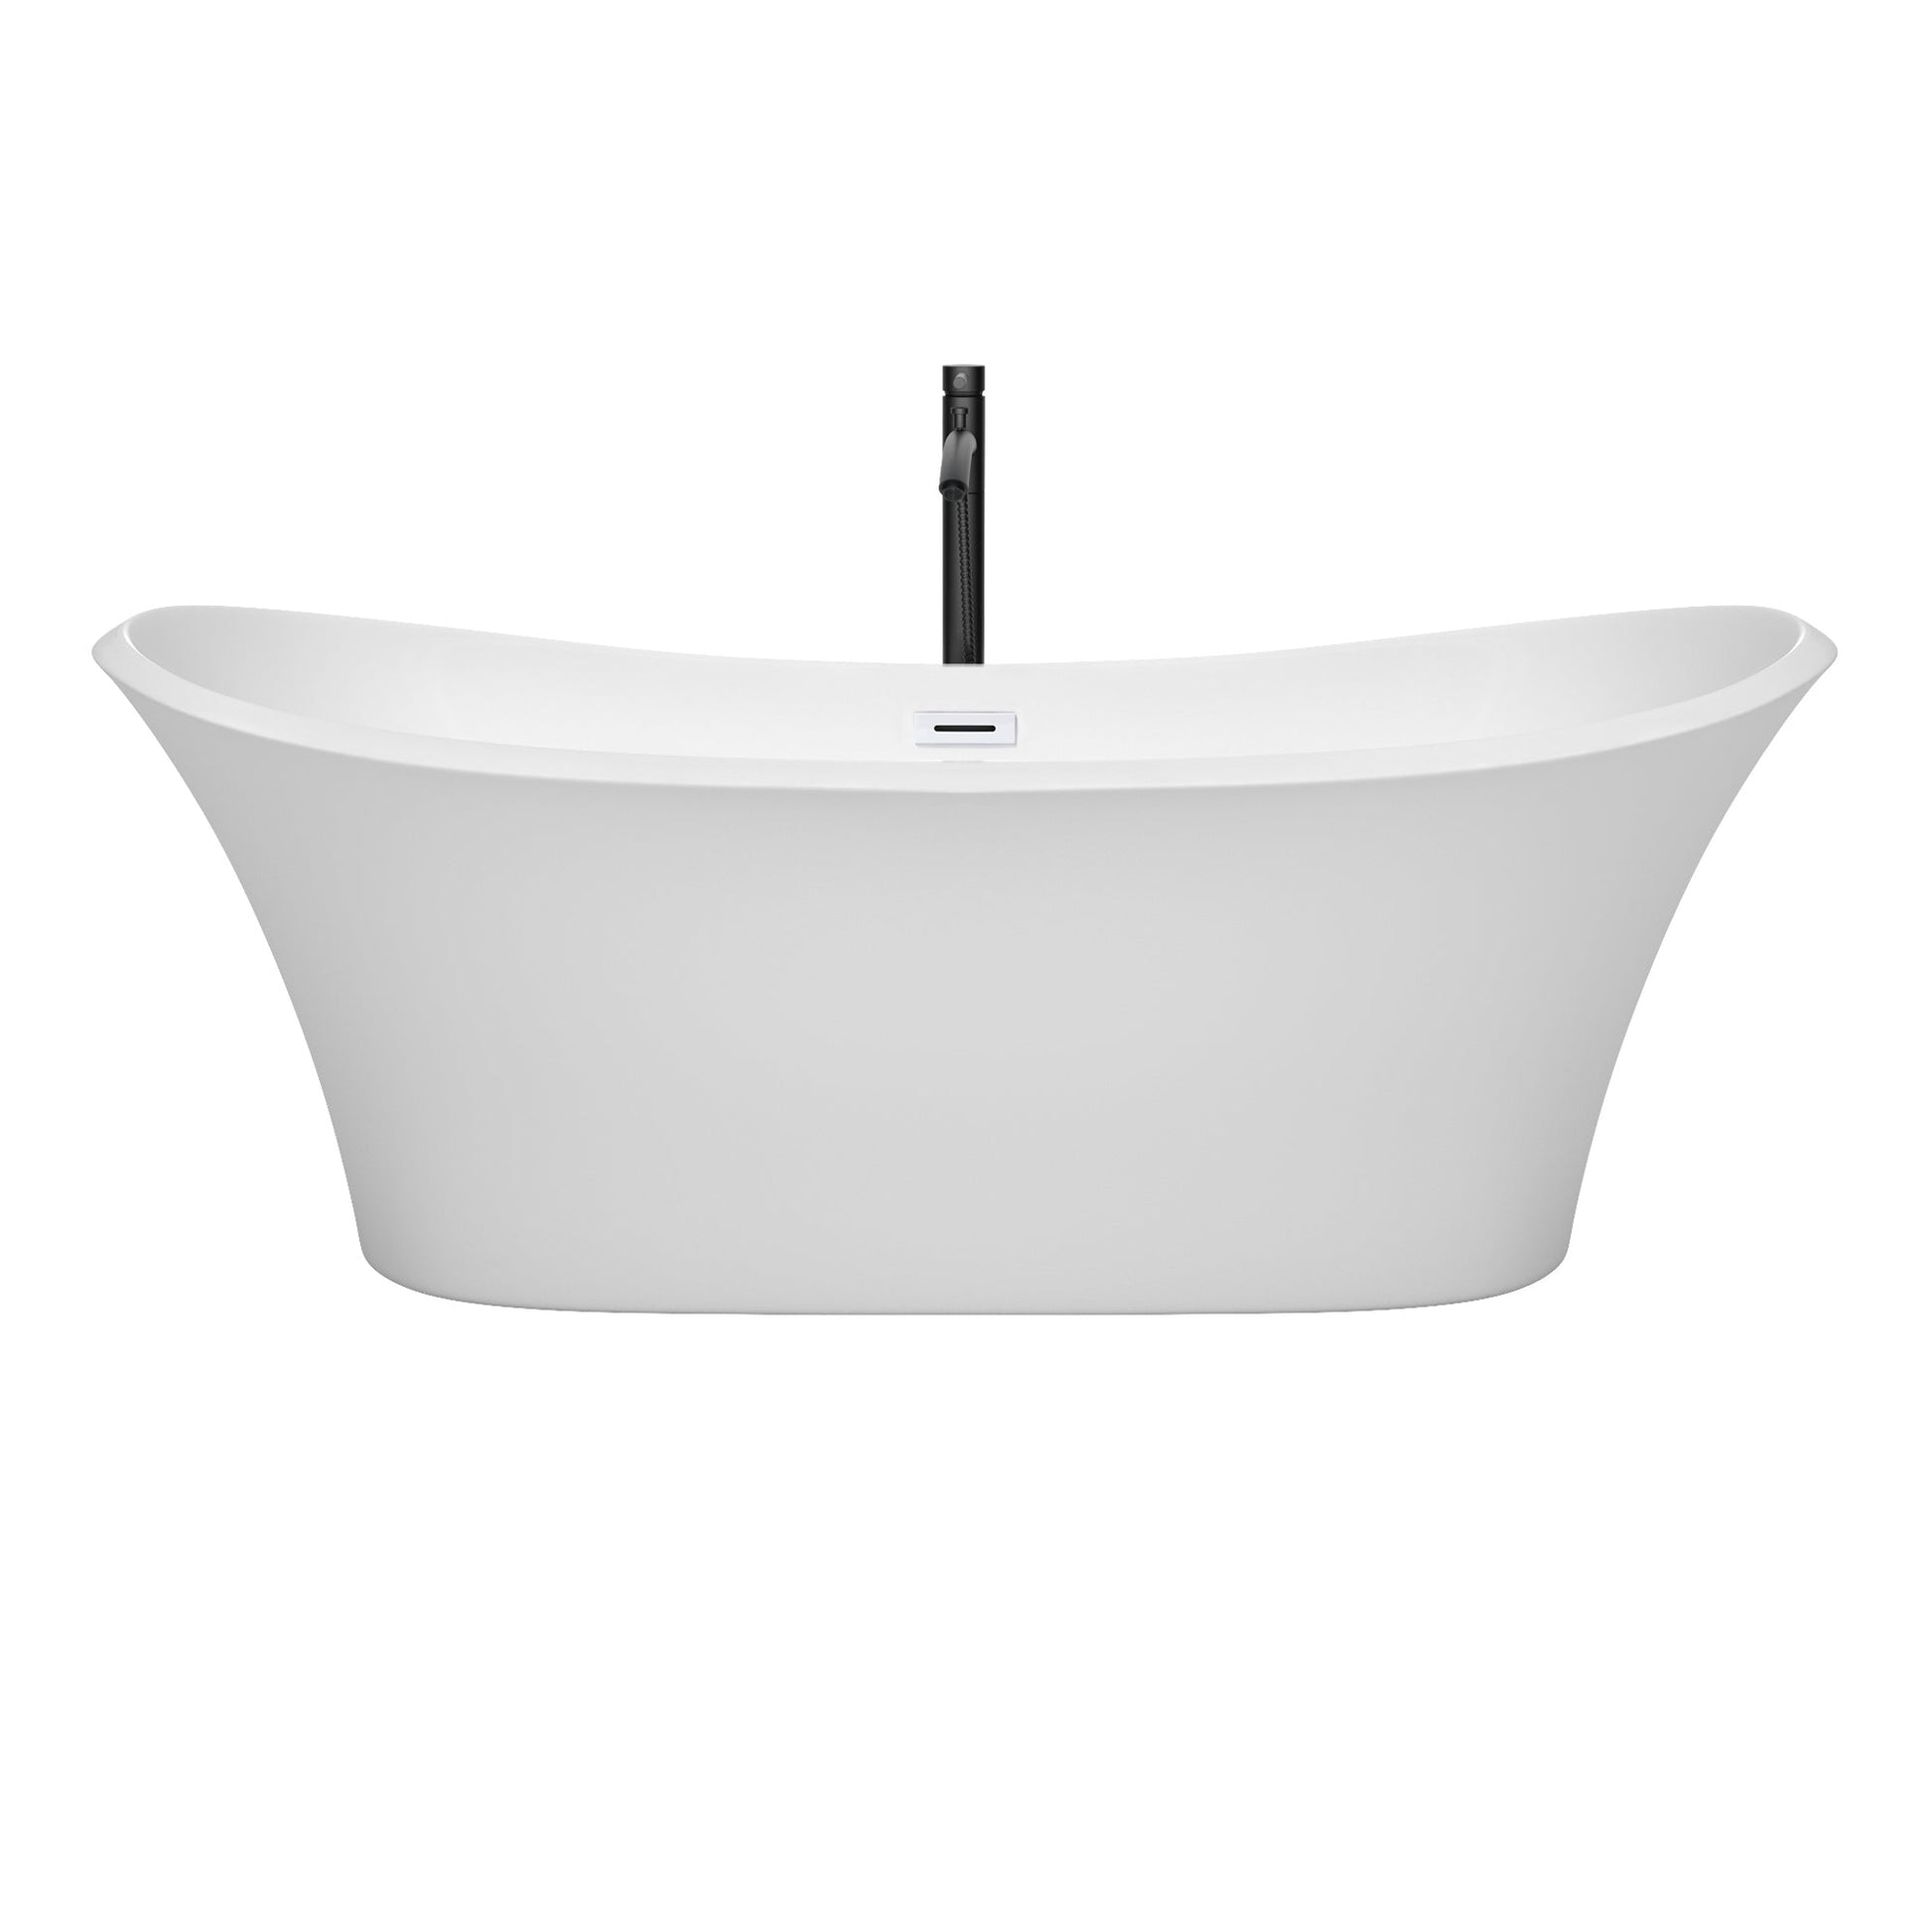 Wyndham Collection Bolera 71" Freestanding Bathtub in White With Shiny White Trim and Floor Mounted Faucet in Matte Black